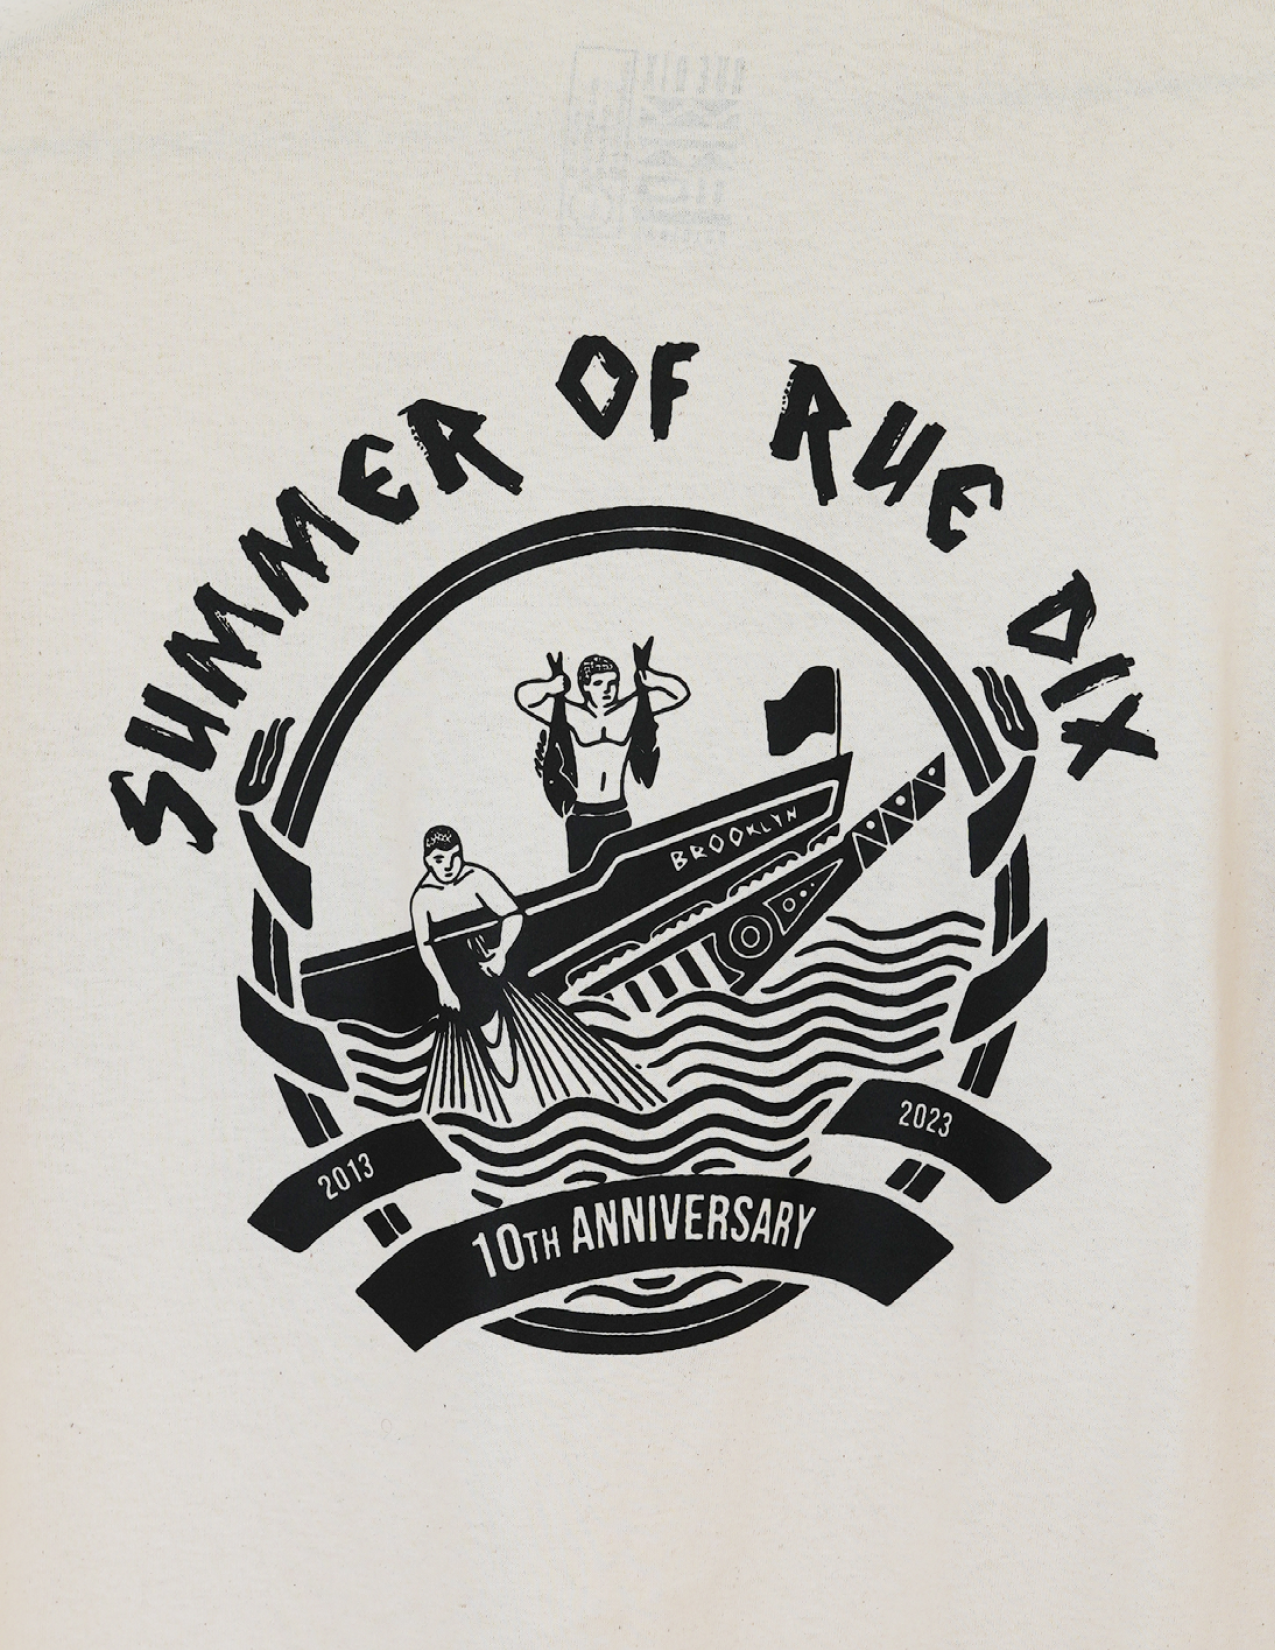 Summer of Rue Dix Limited Edition 10 Year Anniversary T-Shirt